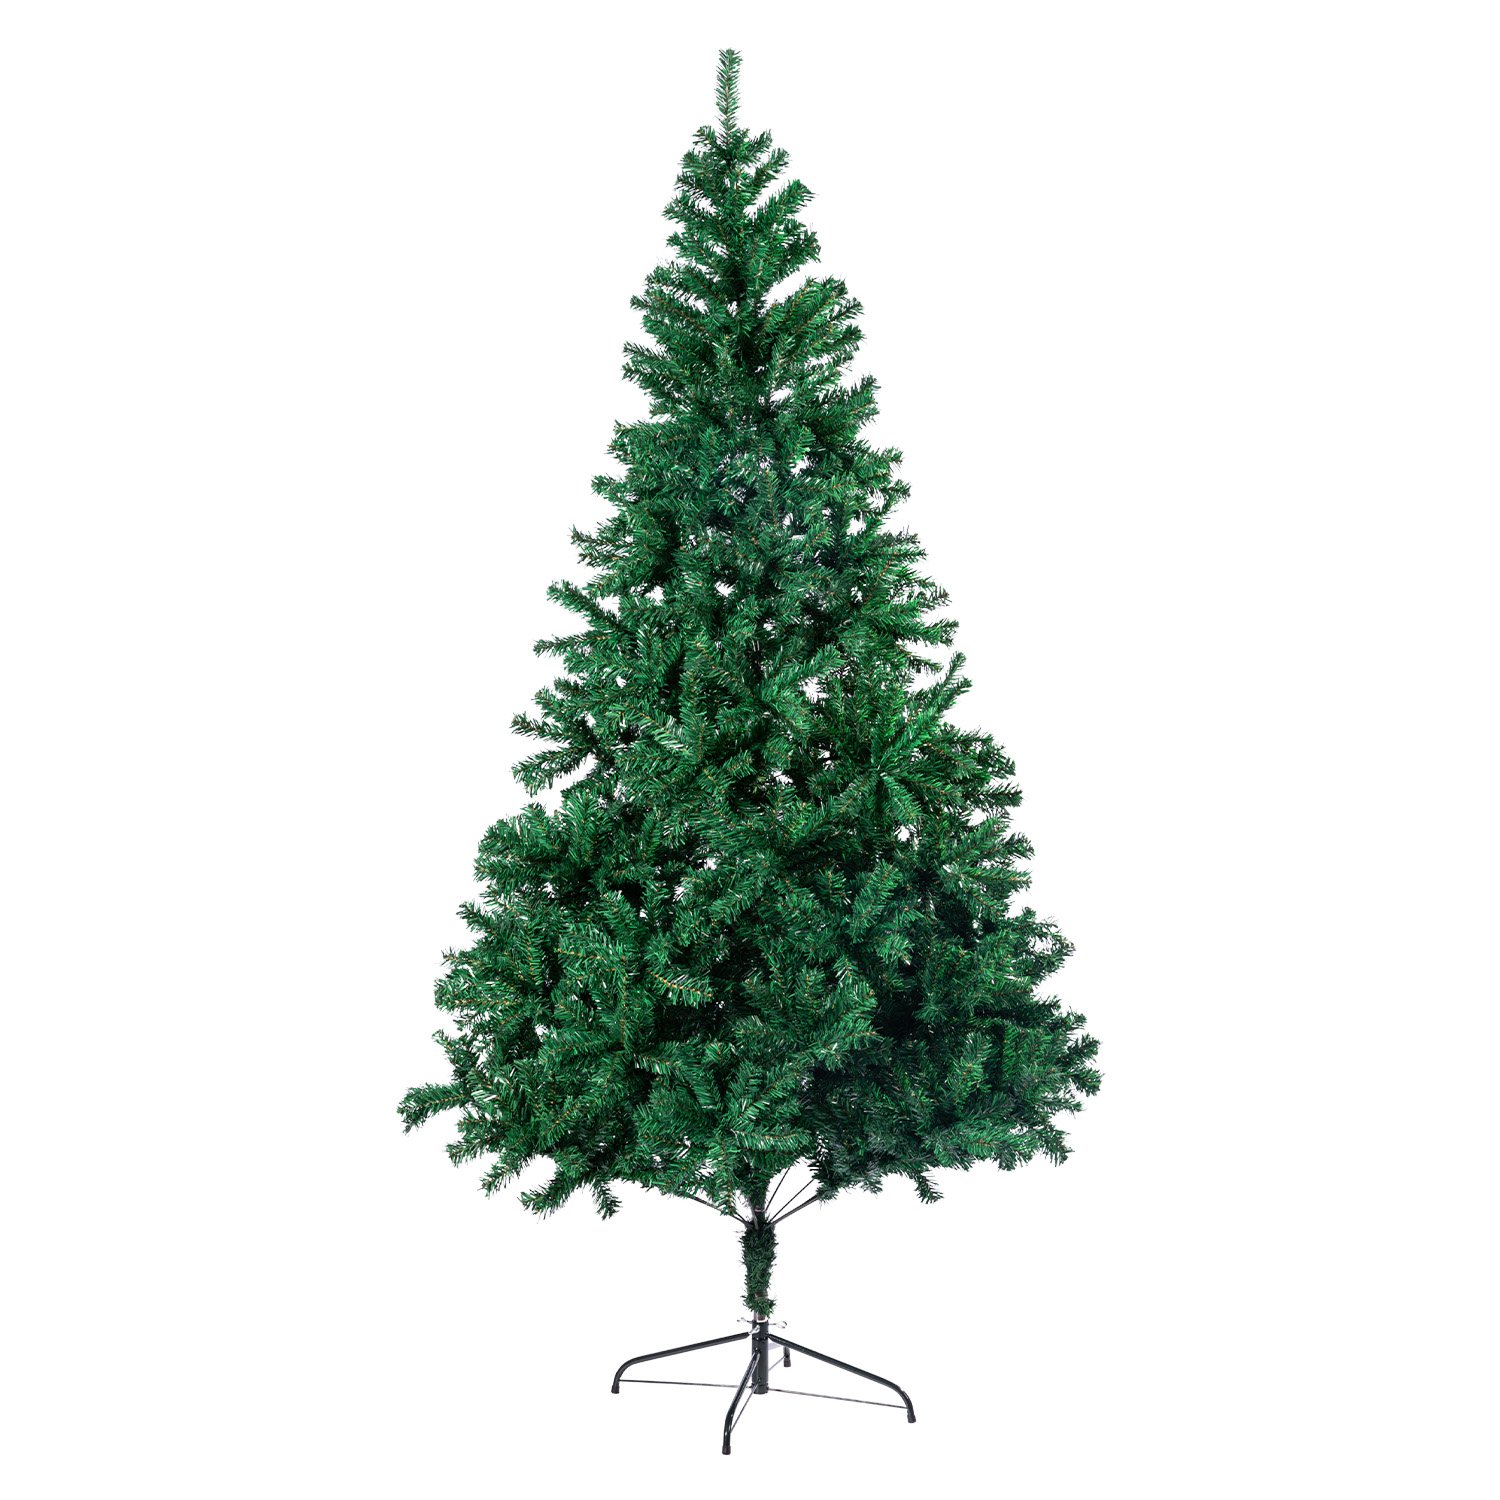 Christabelle Green Artificial Christmas Tree 1.8m - 850 Tips 1